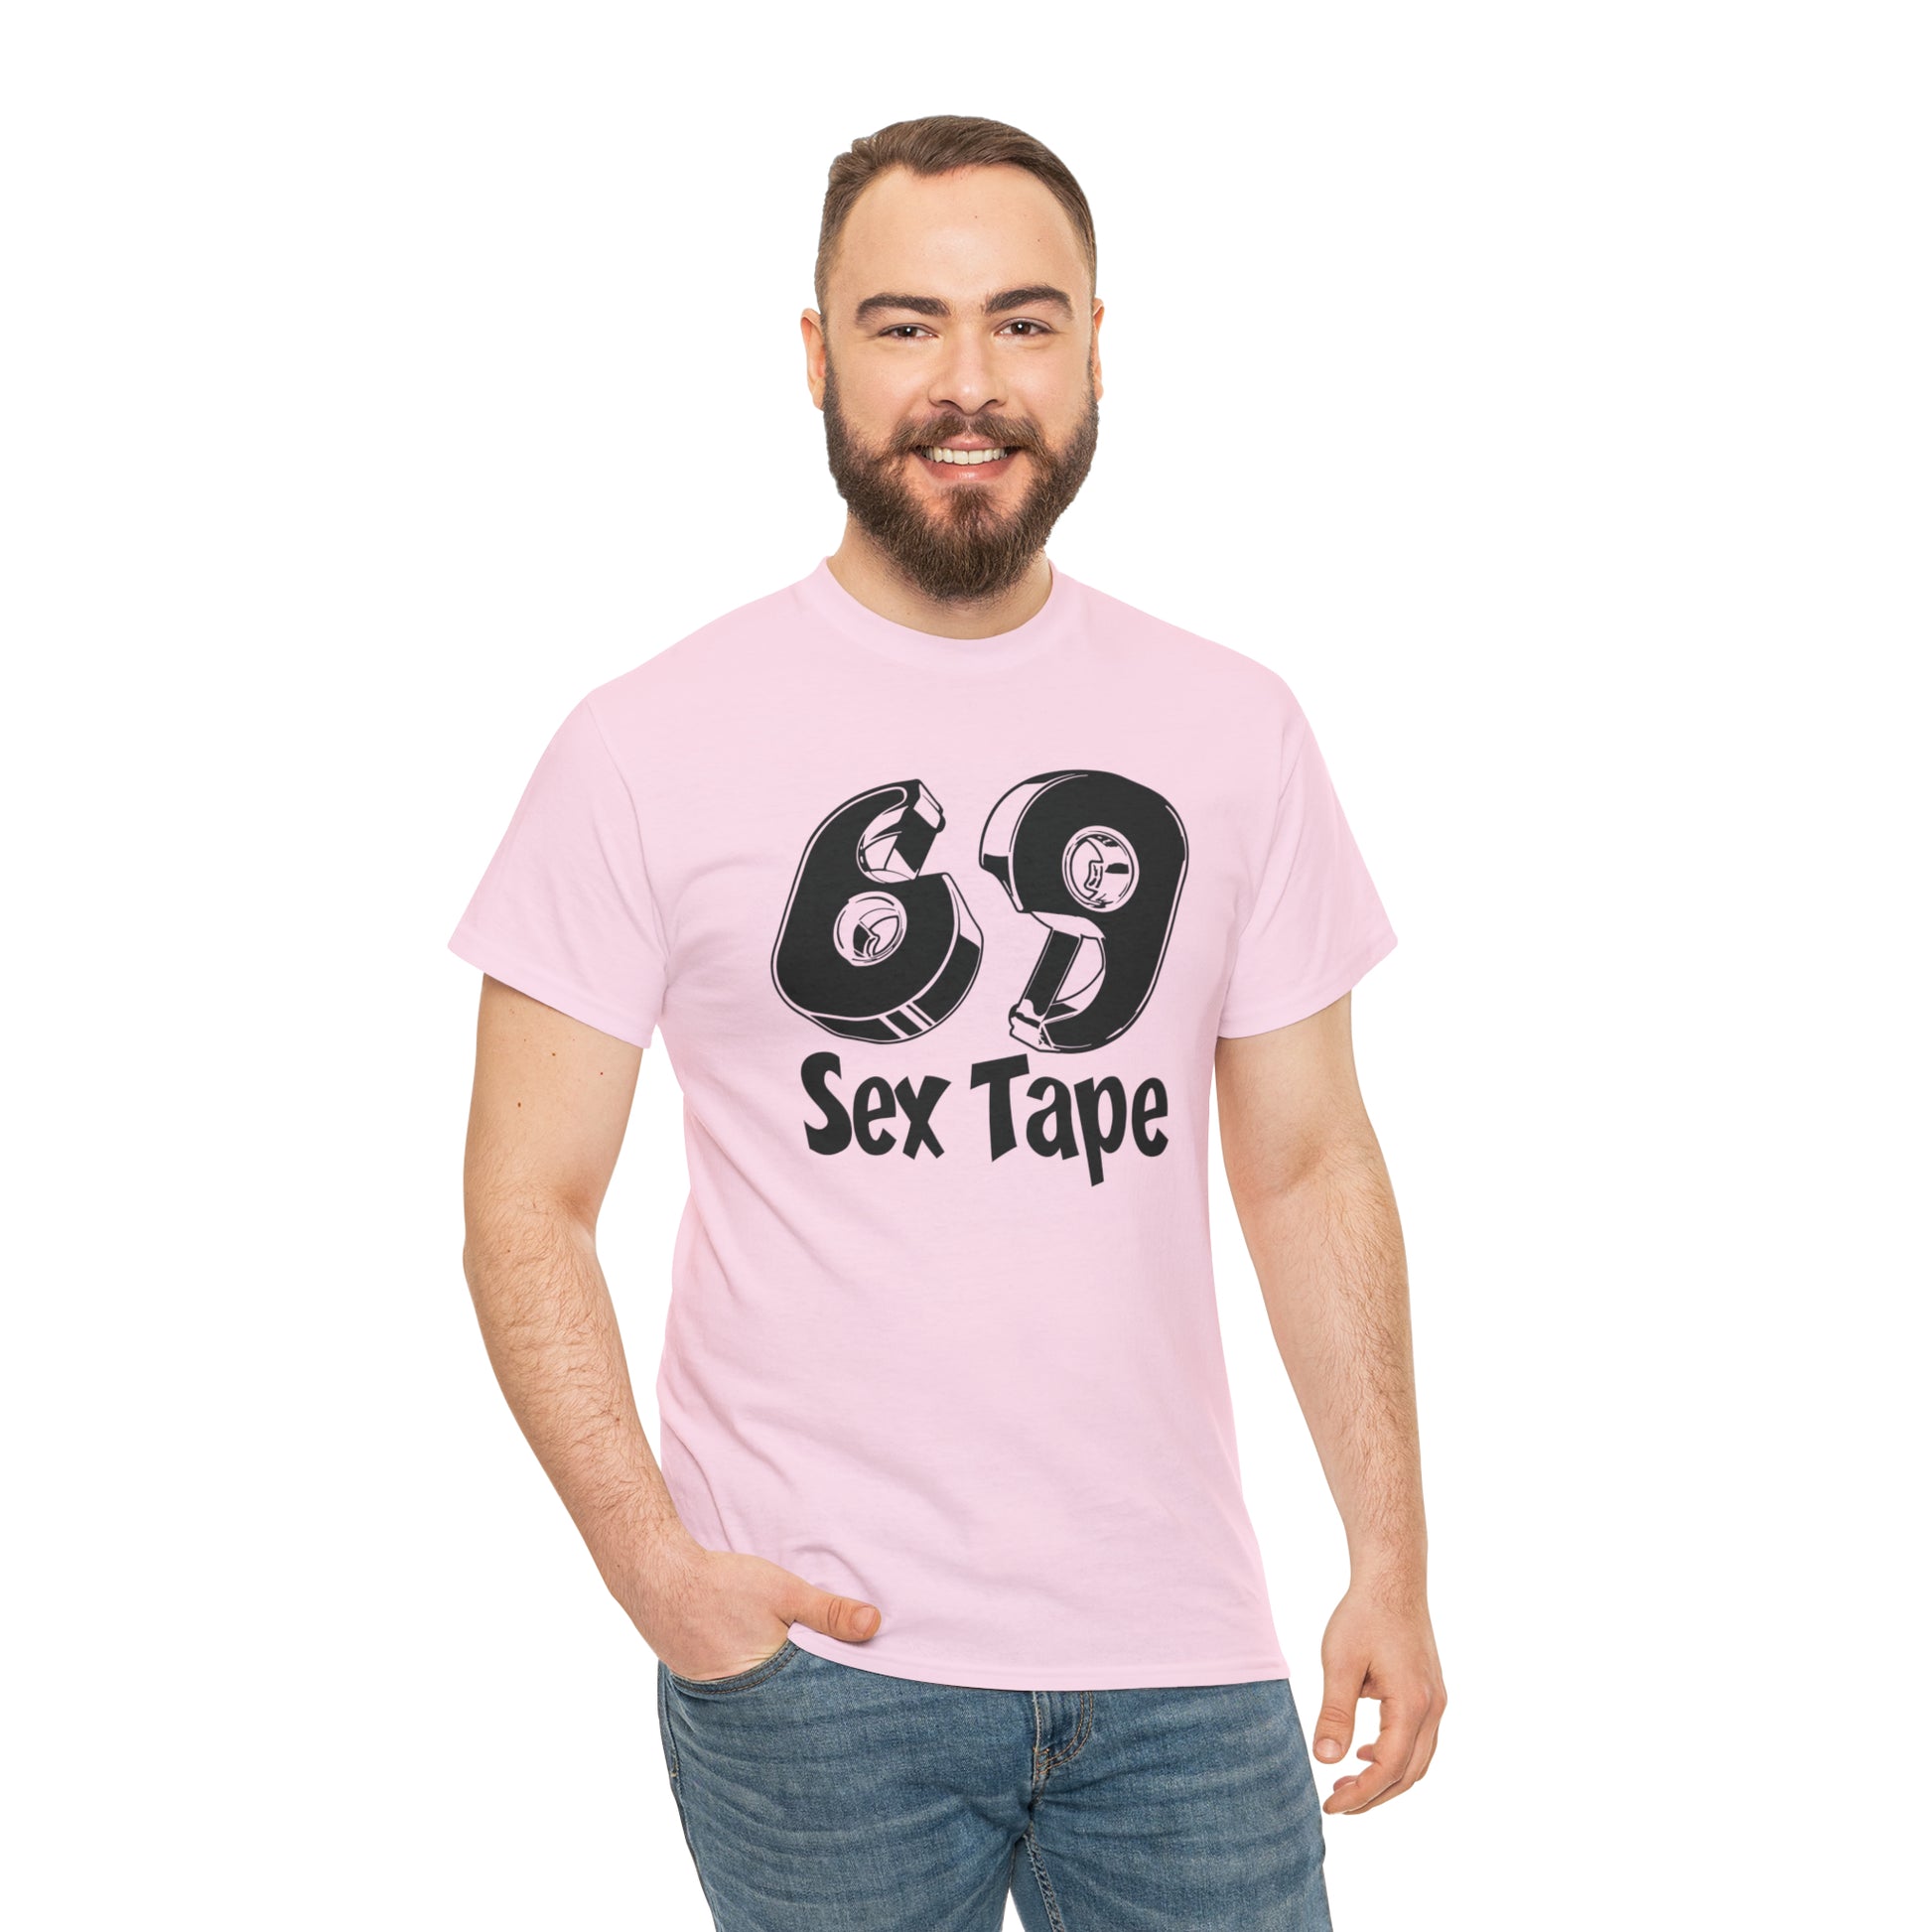 "Sex Tape" T-Shirt - Weave Got Gifts - Unique Gifts You Won’t Find Anywhere Else!